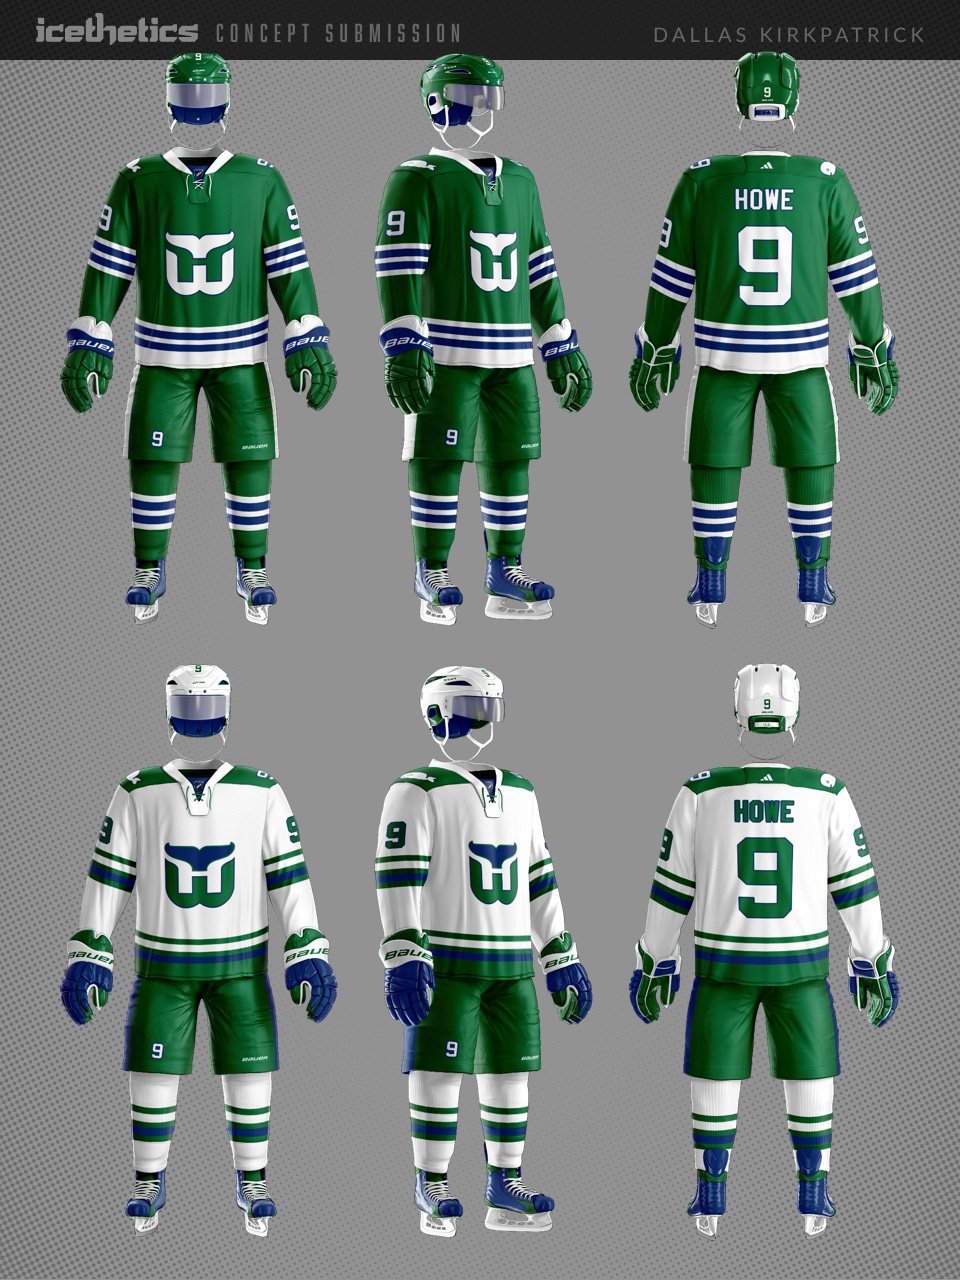 hartford whalers concept jersey